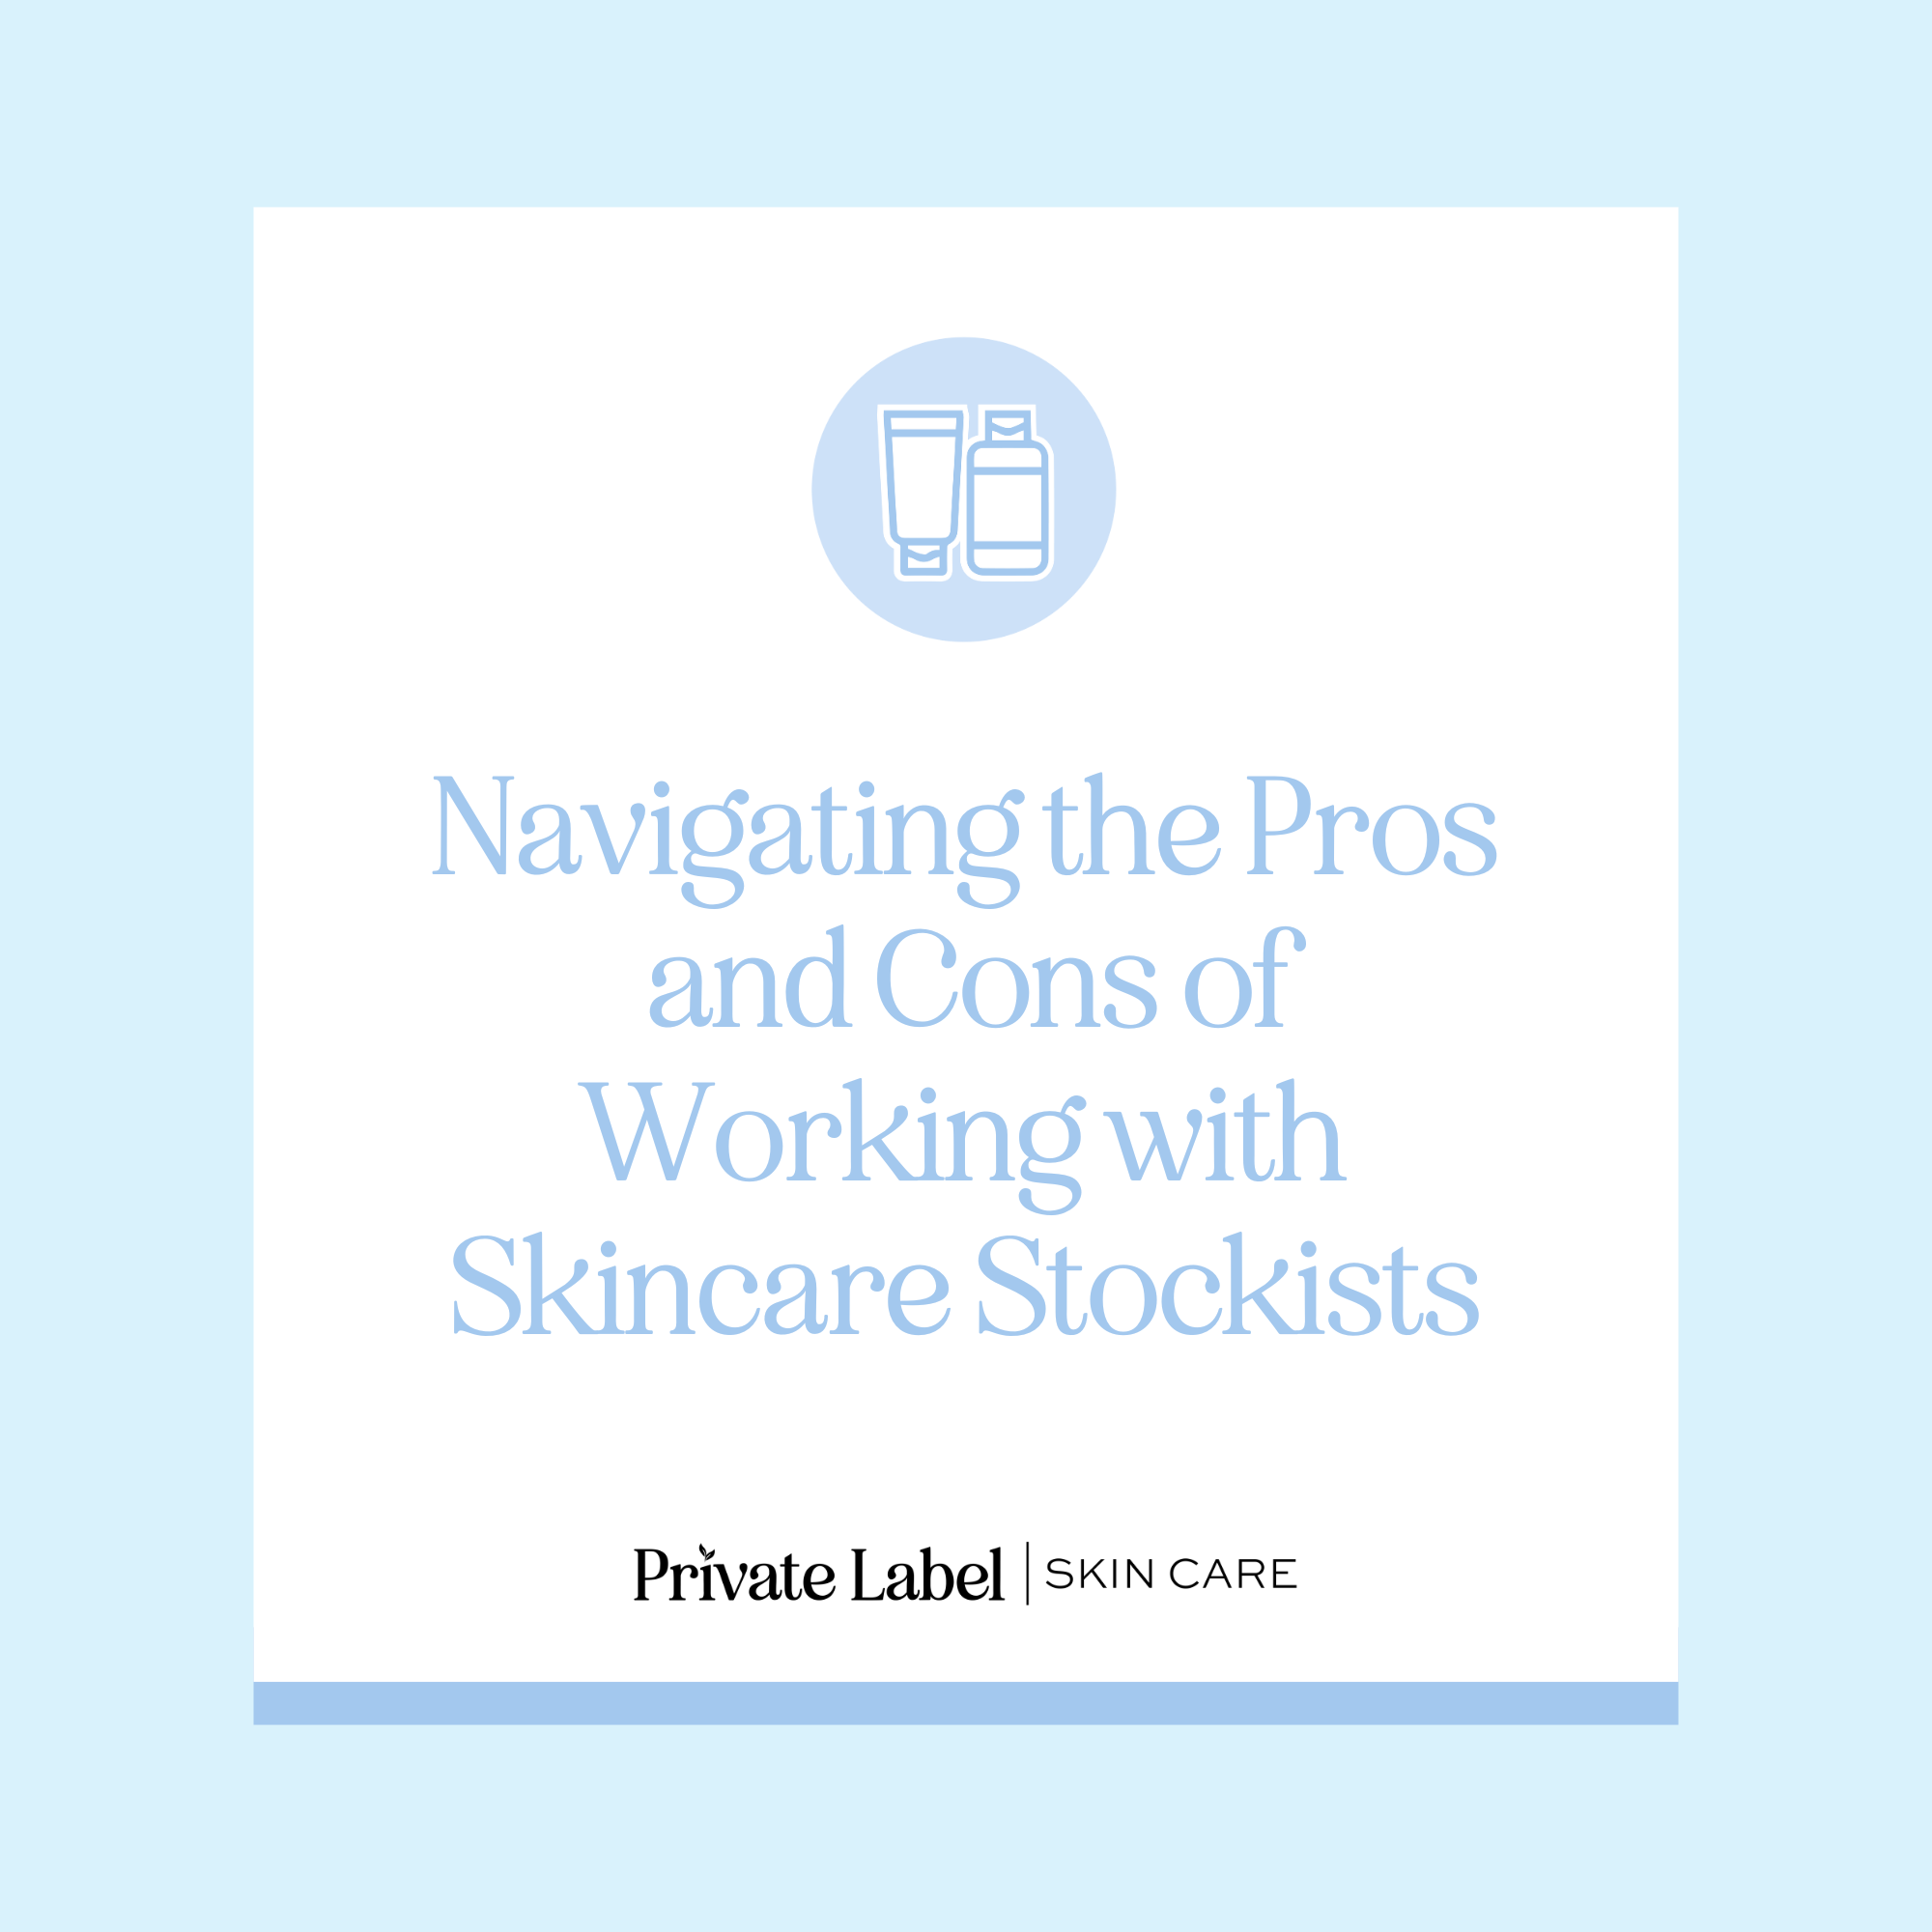 Navigating the Pros and Cons of Working with Skincare Stockists